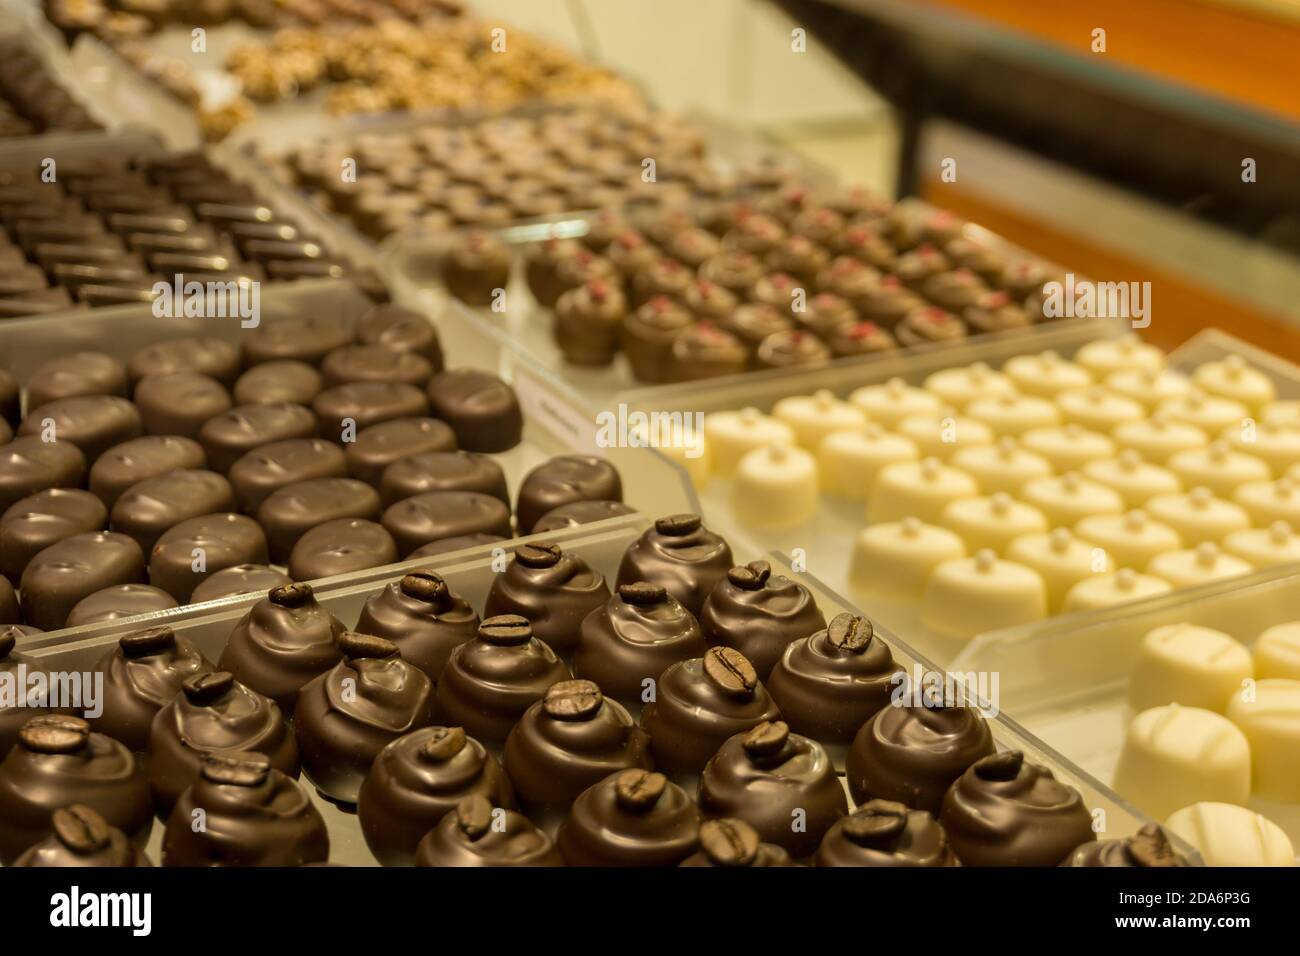 Patern of many different chocolate pralines in showcase at store Stock Photo